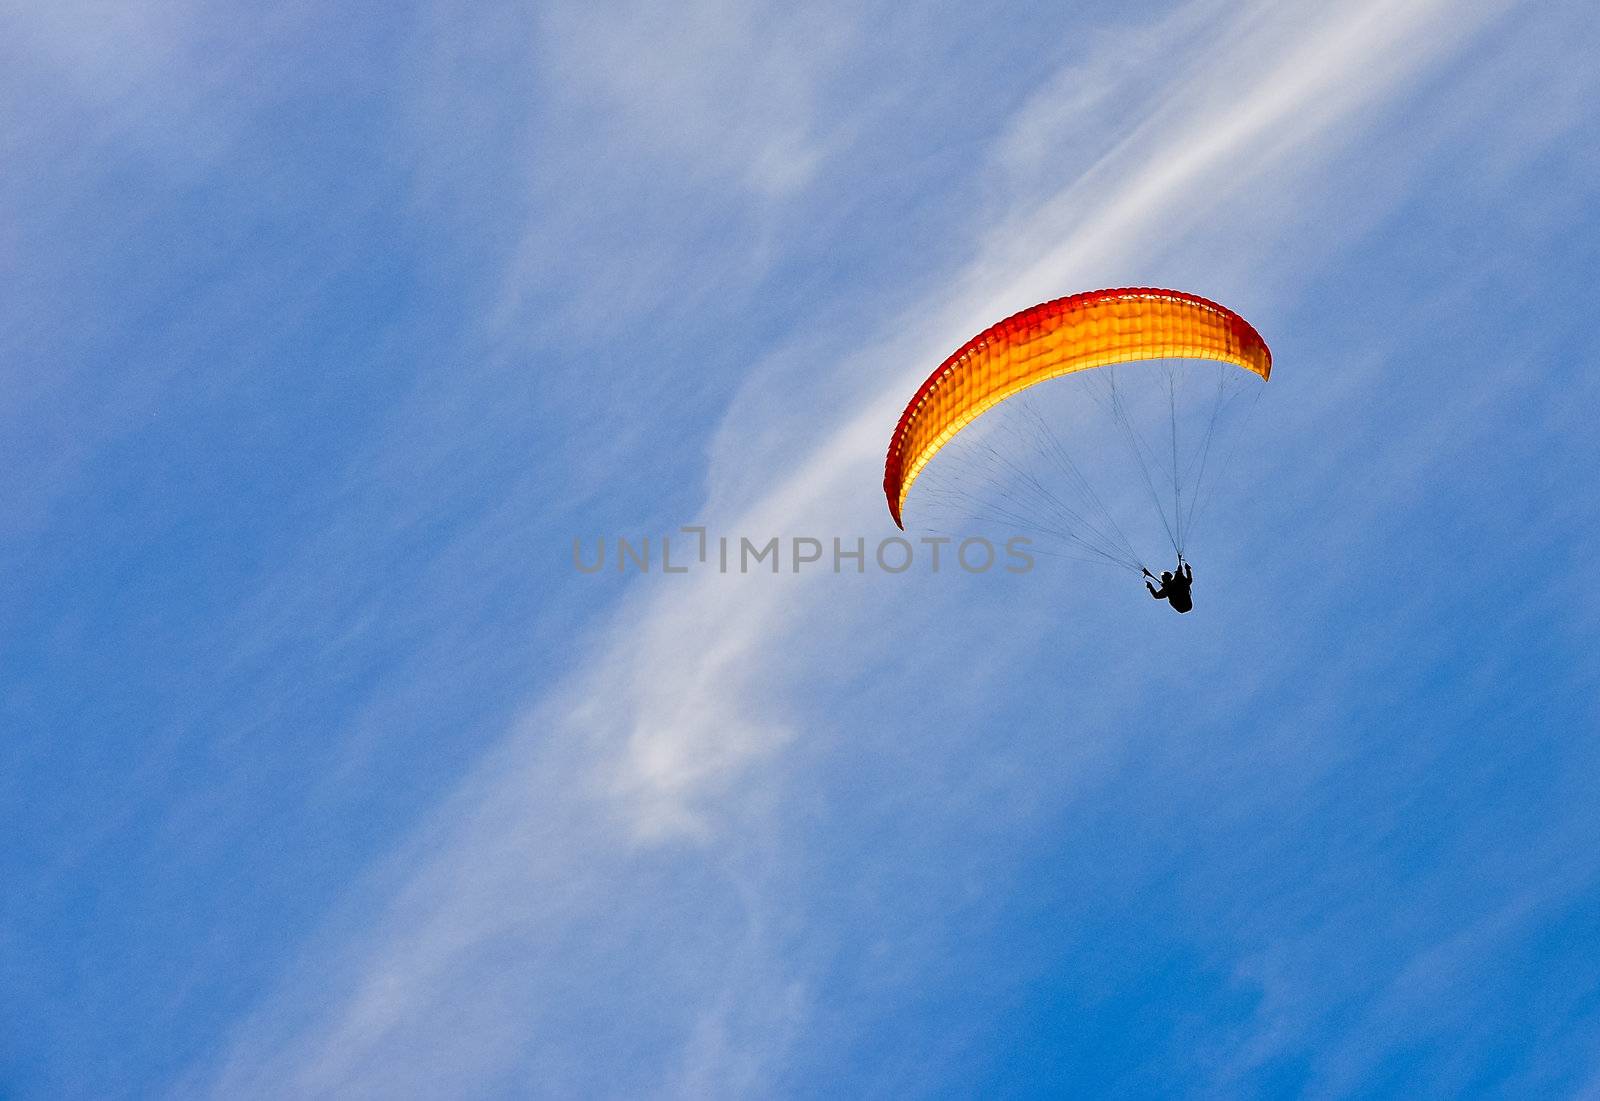 Winter mountains and paragliding with sky background by martinm303